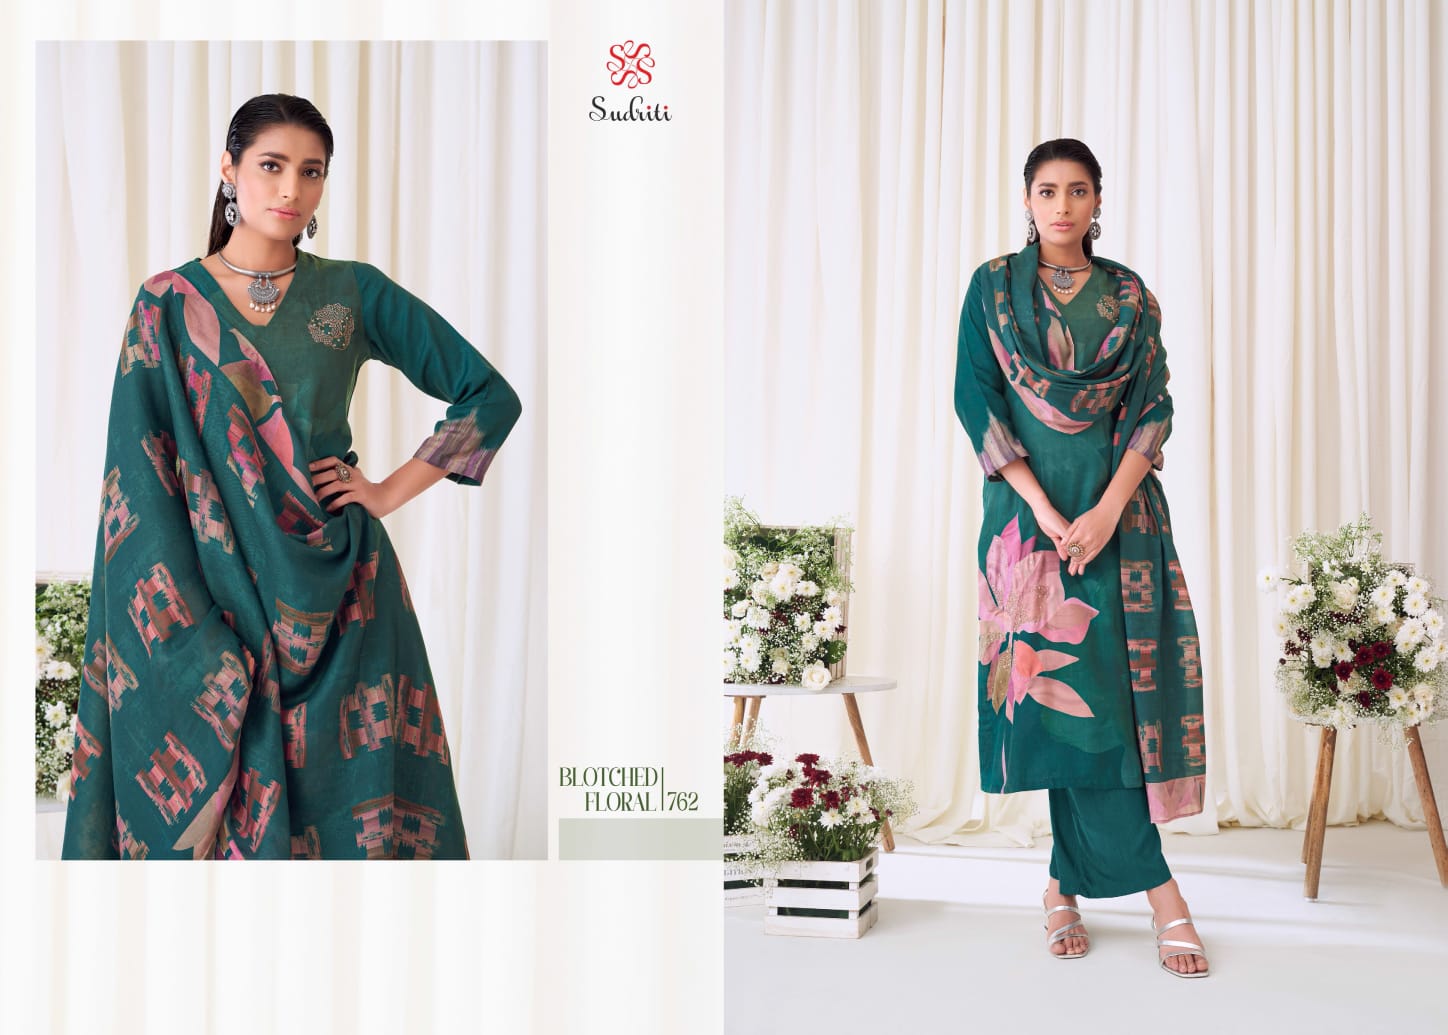 Sudriti Blotched Floral collection 5